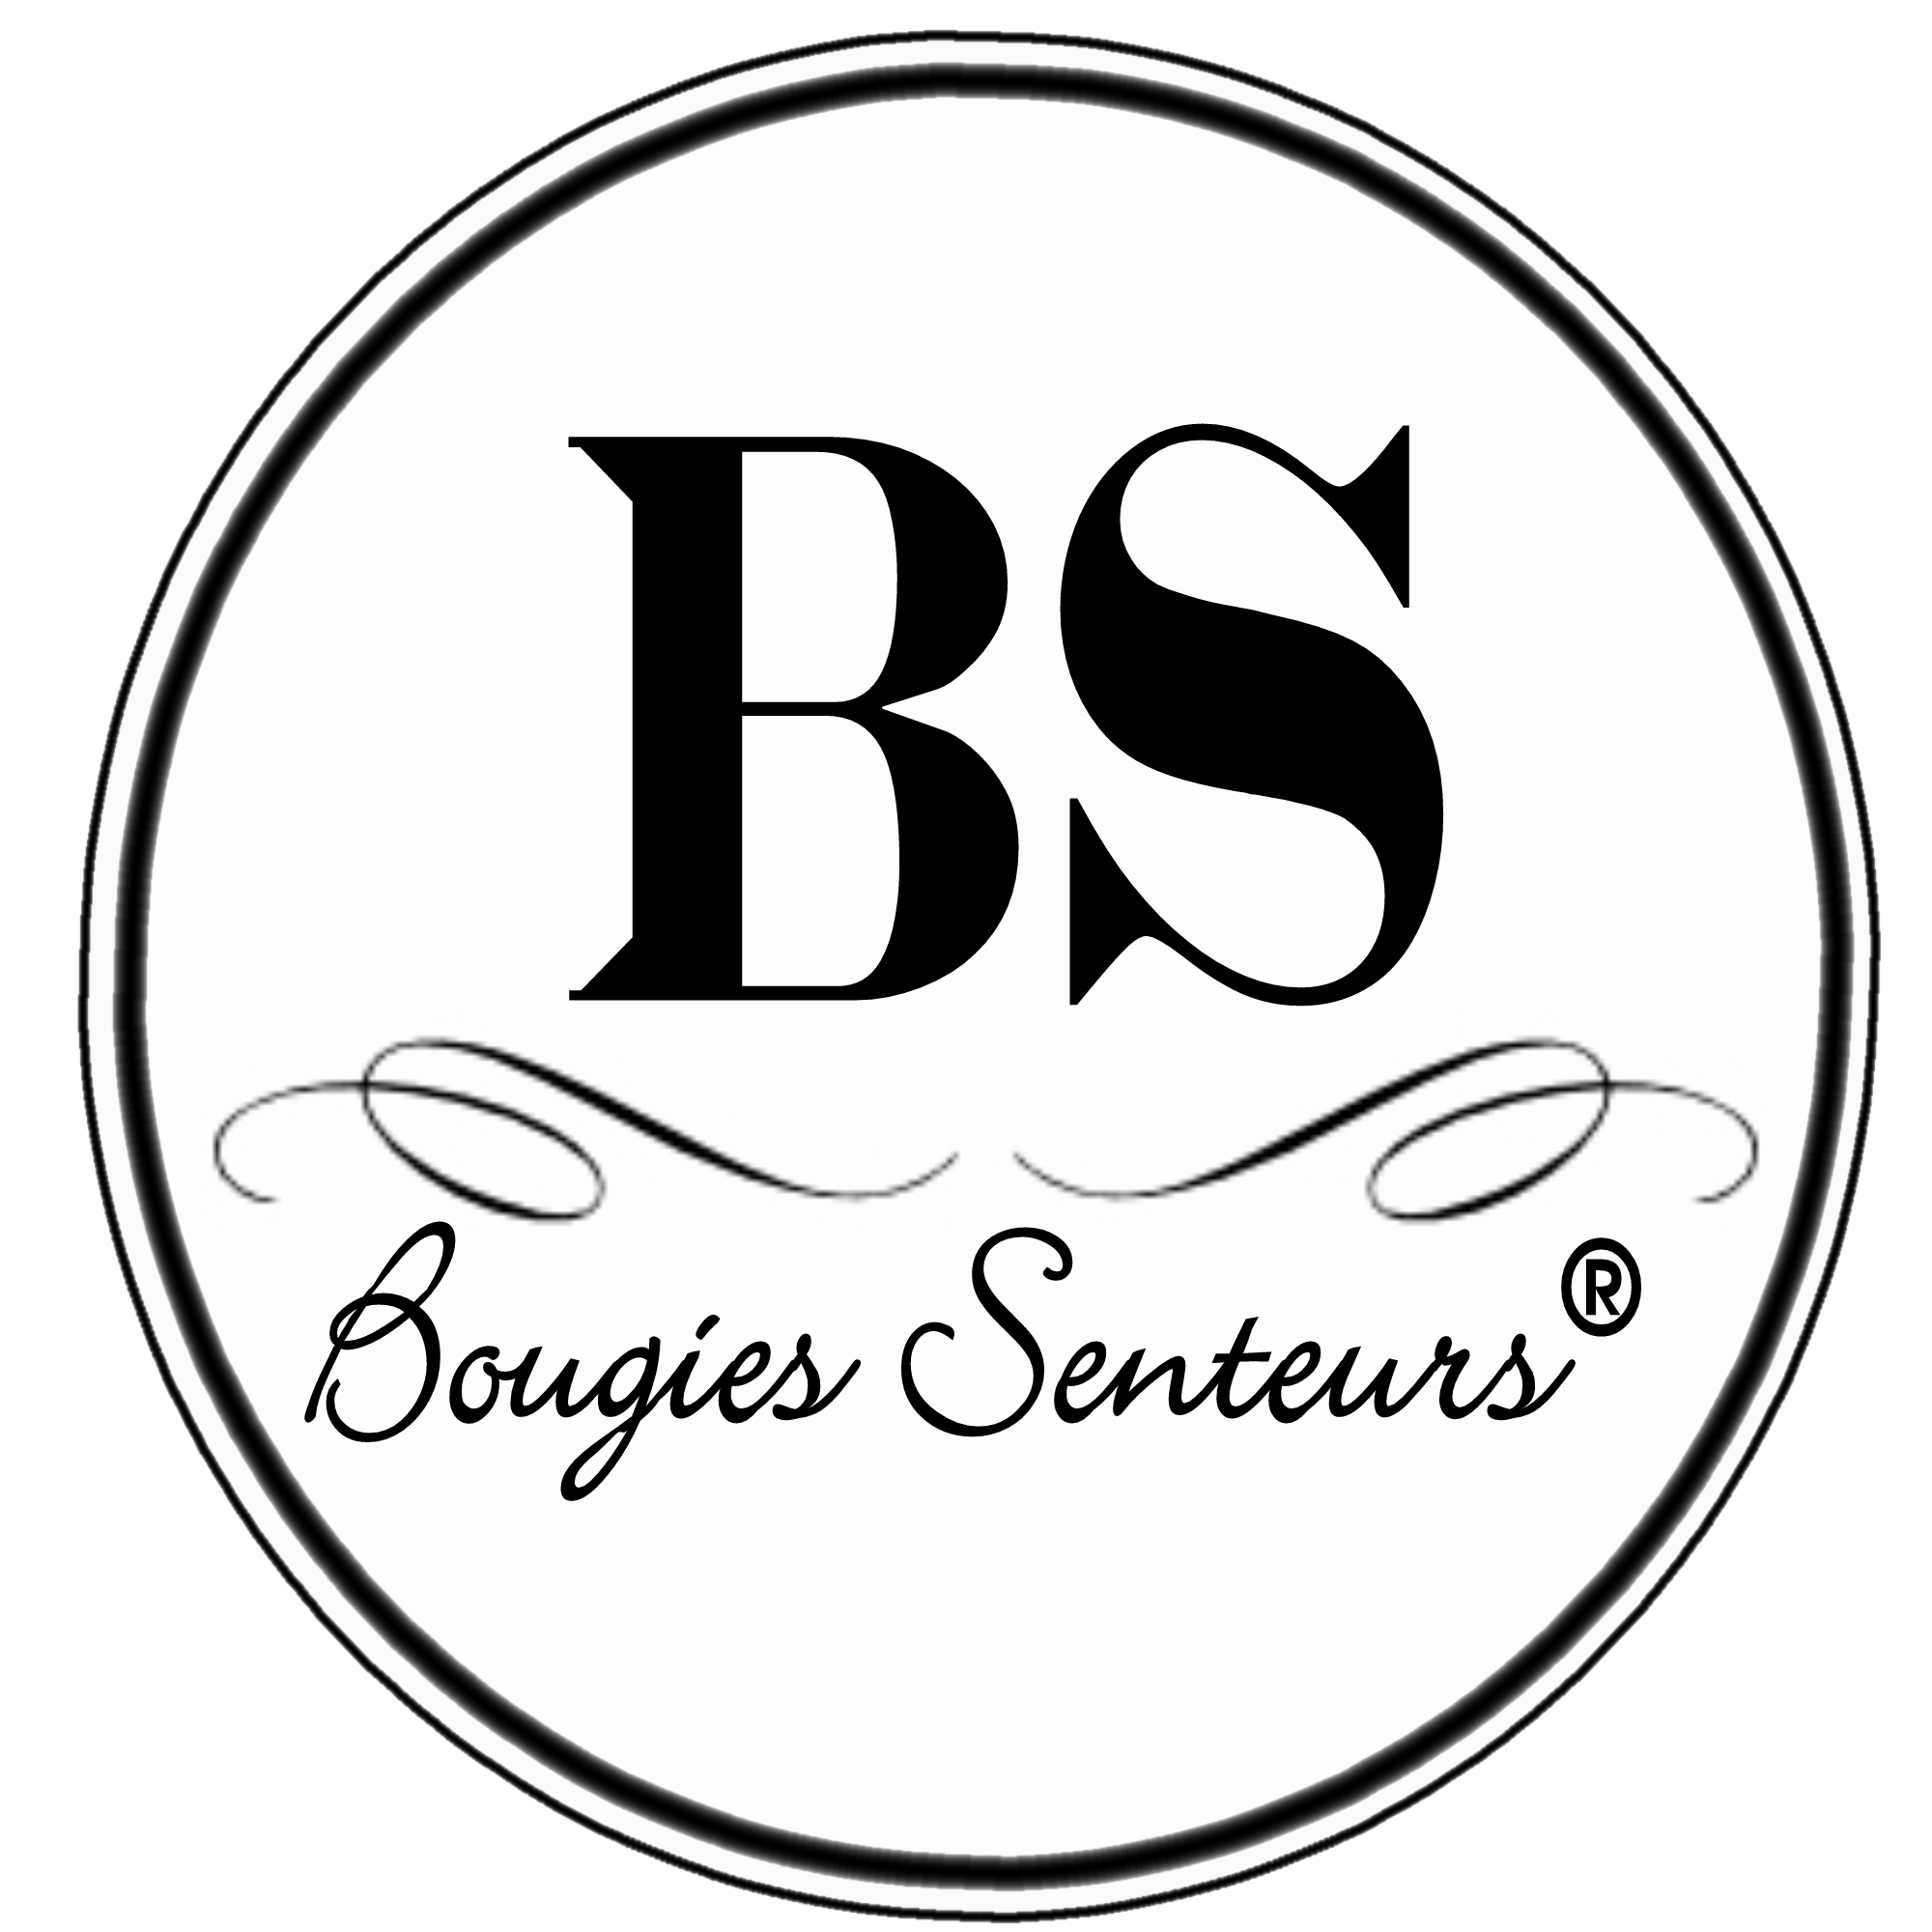 BOUGIES SENTEURS CANY-BARVILLE